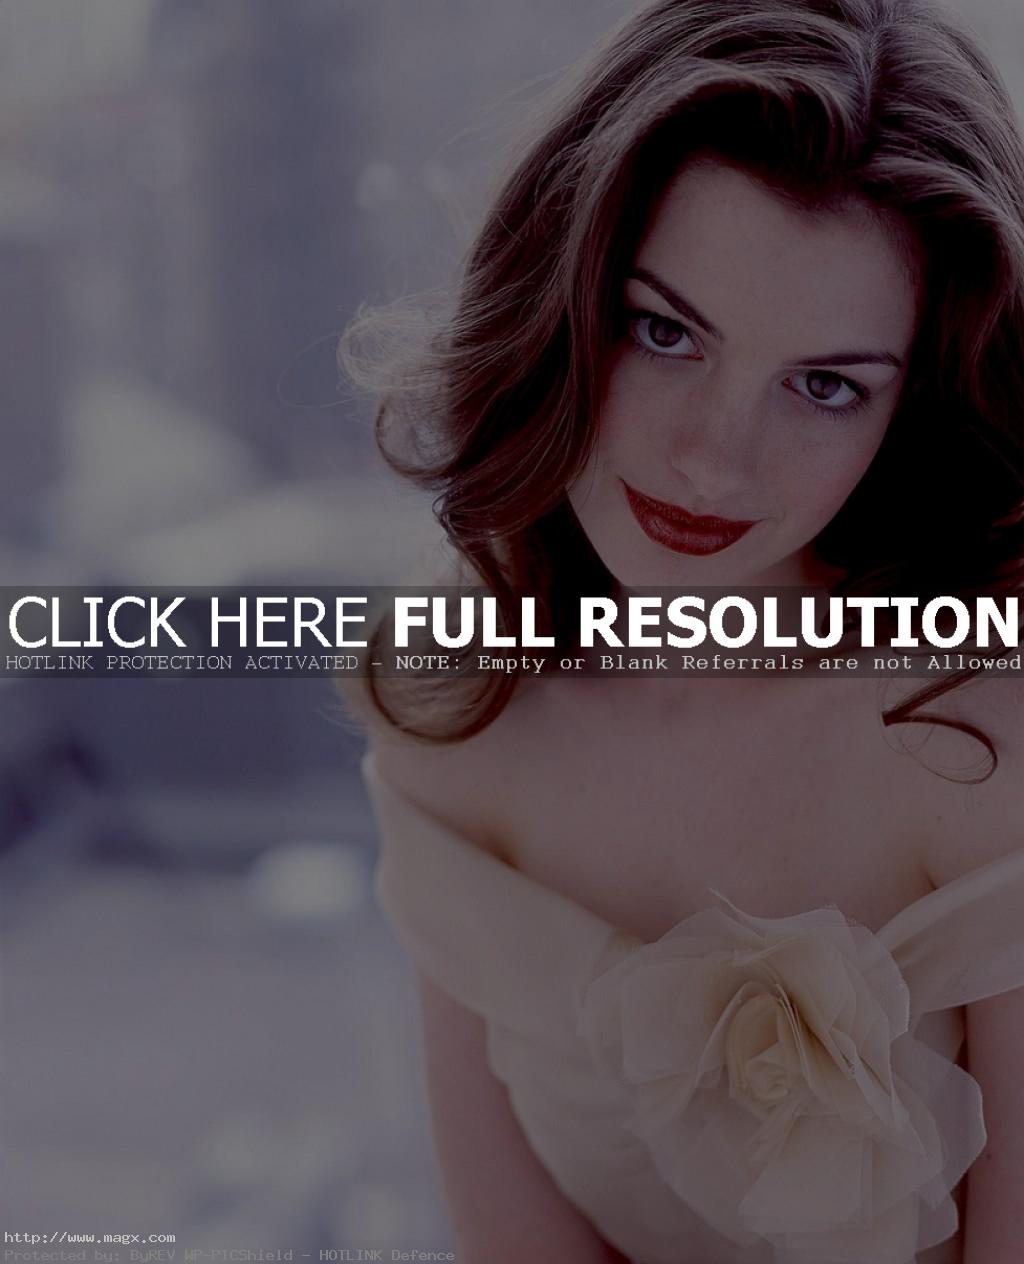 anne hathaway6 Anne Hathaway Biography and Hot Photos